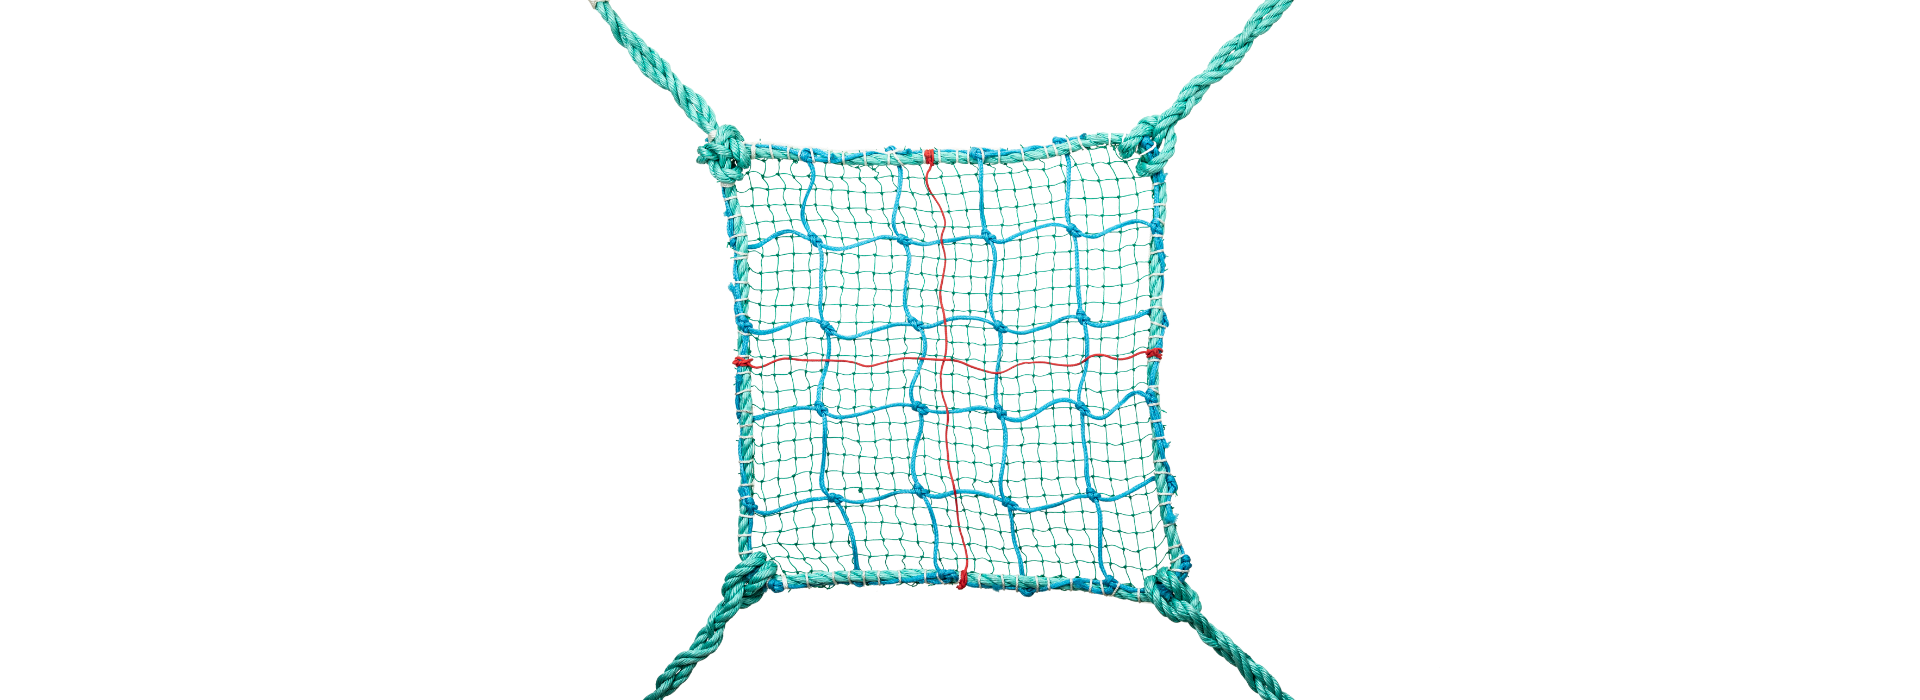 5mm Braided Safety Net of Garware Technical Fibres